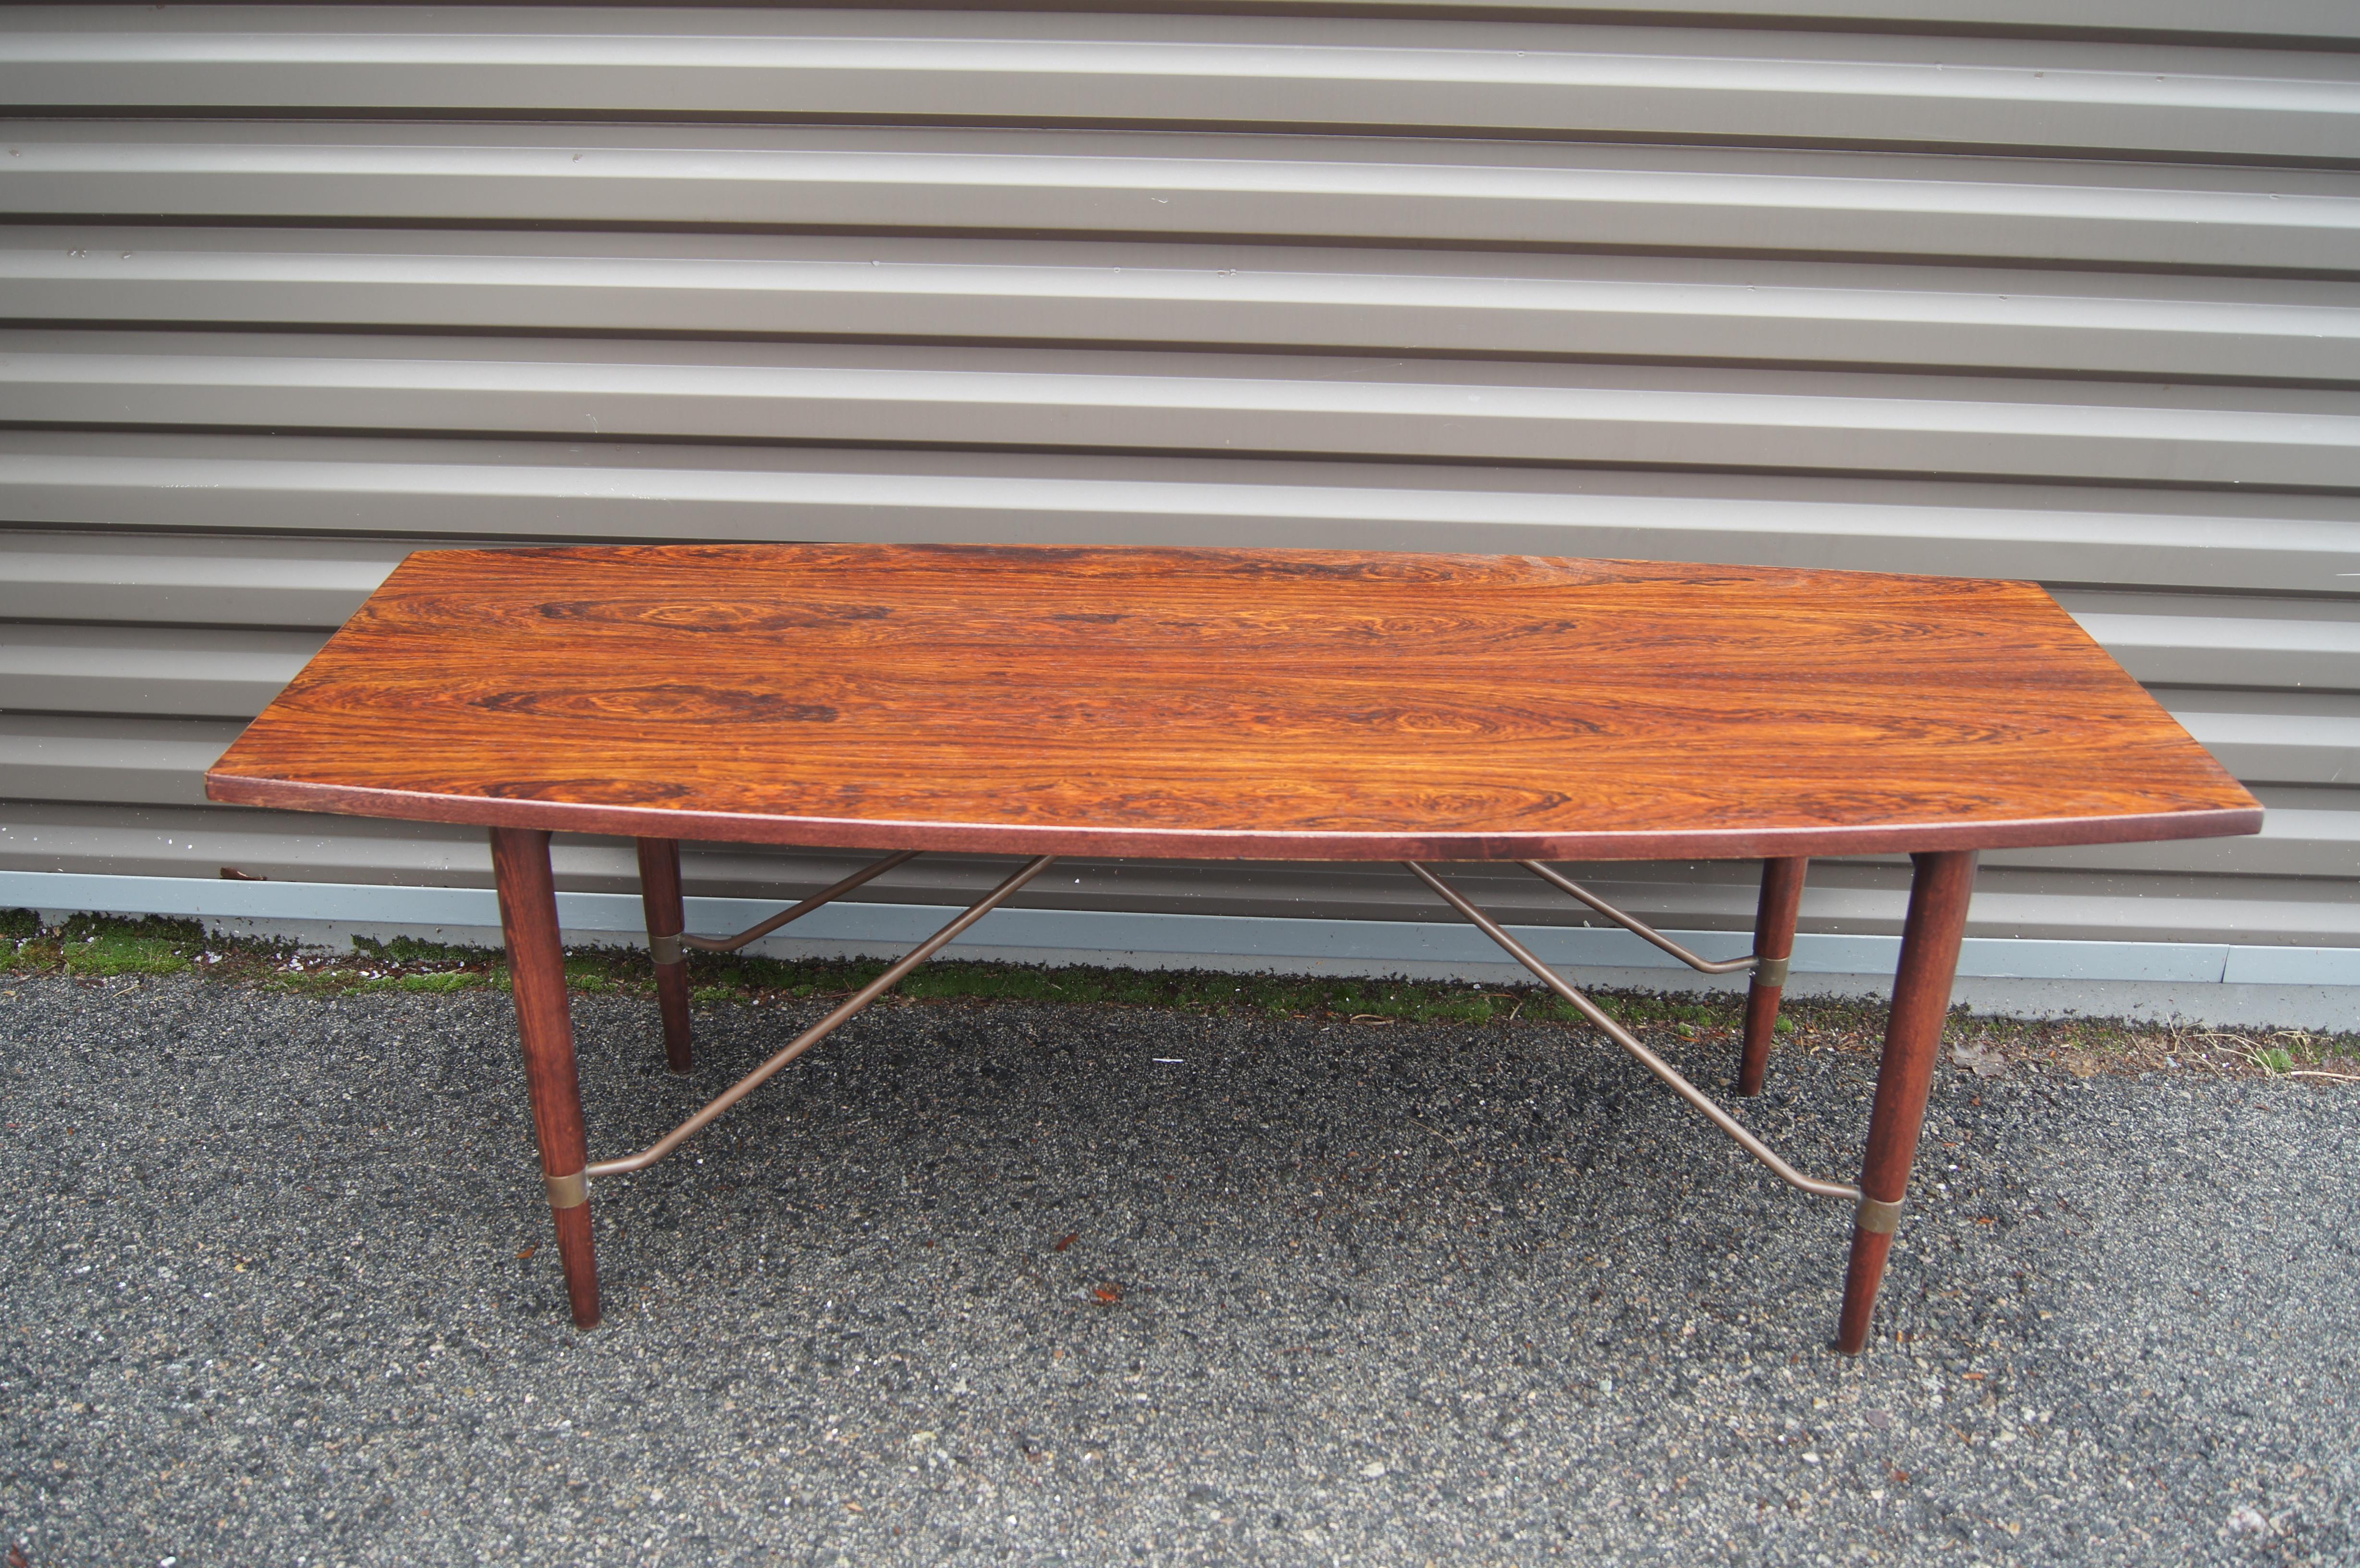 The tapered legs of this unusual Danish Modern rosewood coffee table are braced by copper supports extending from below the gently curved top. The grain of the rosewood surface is striking.